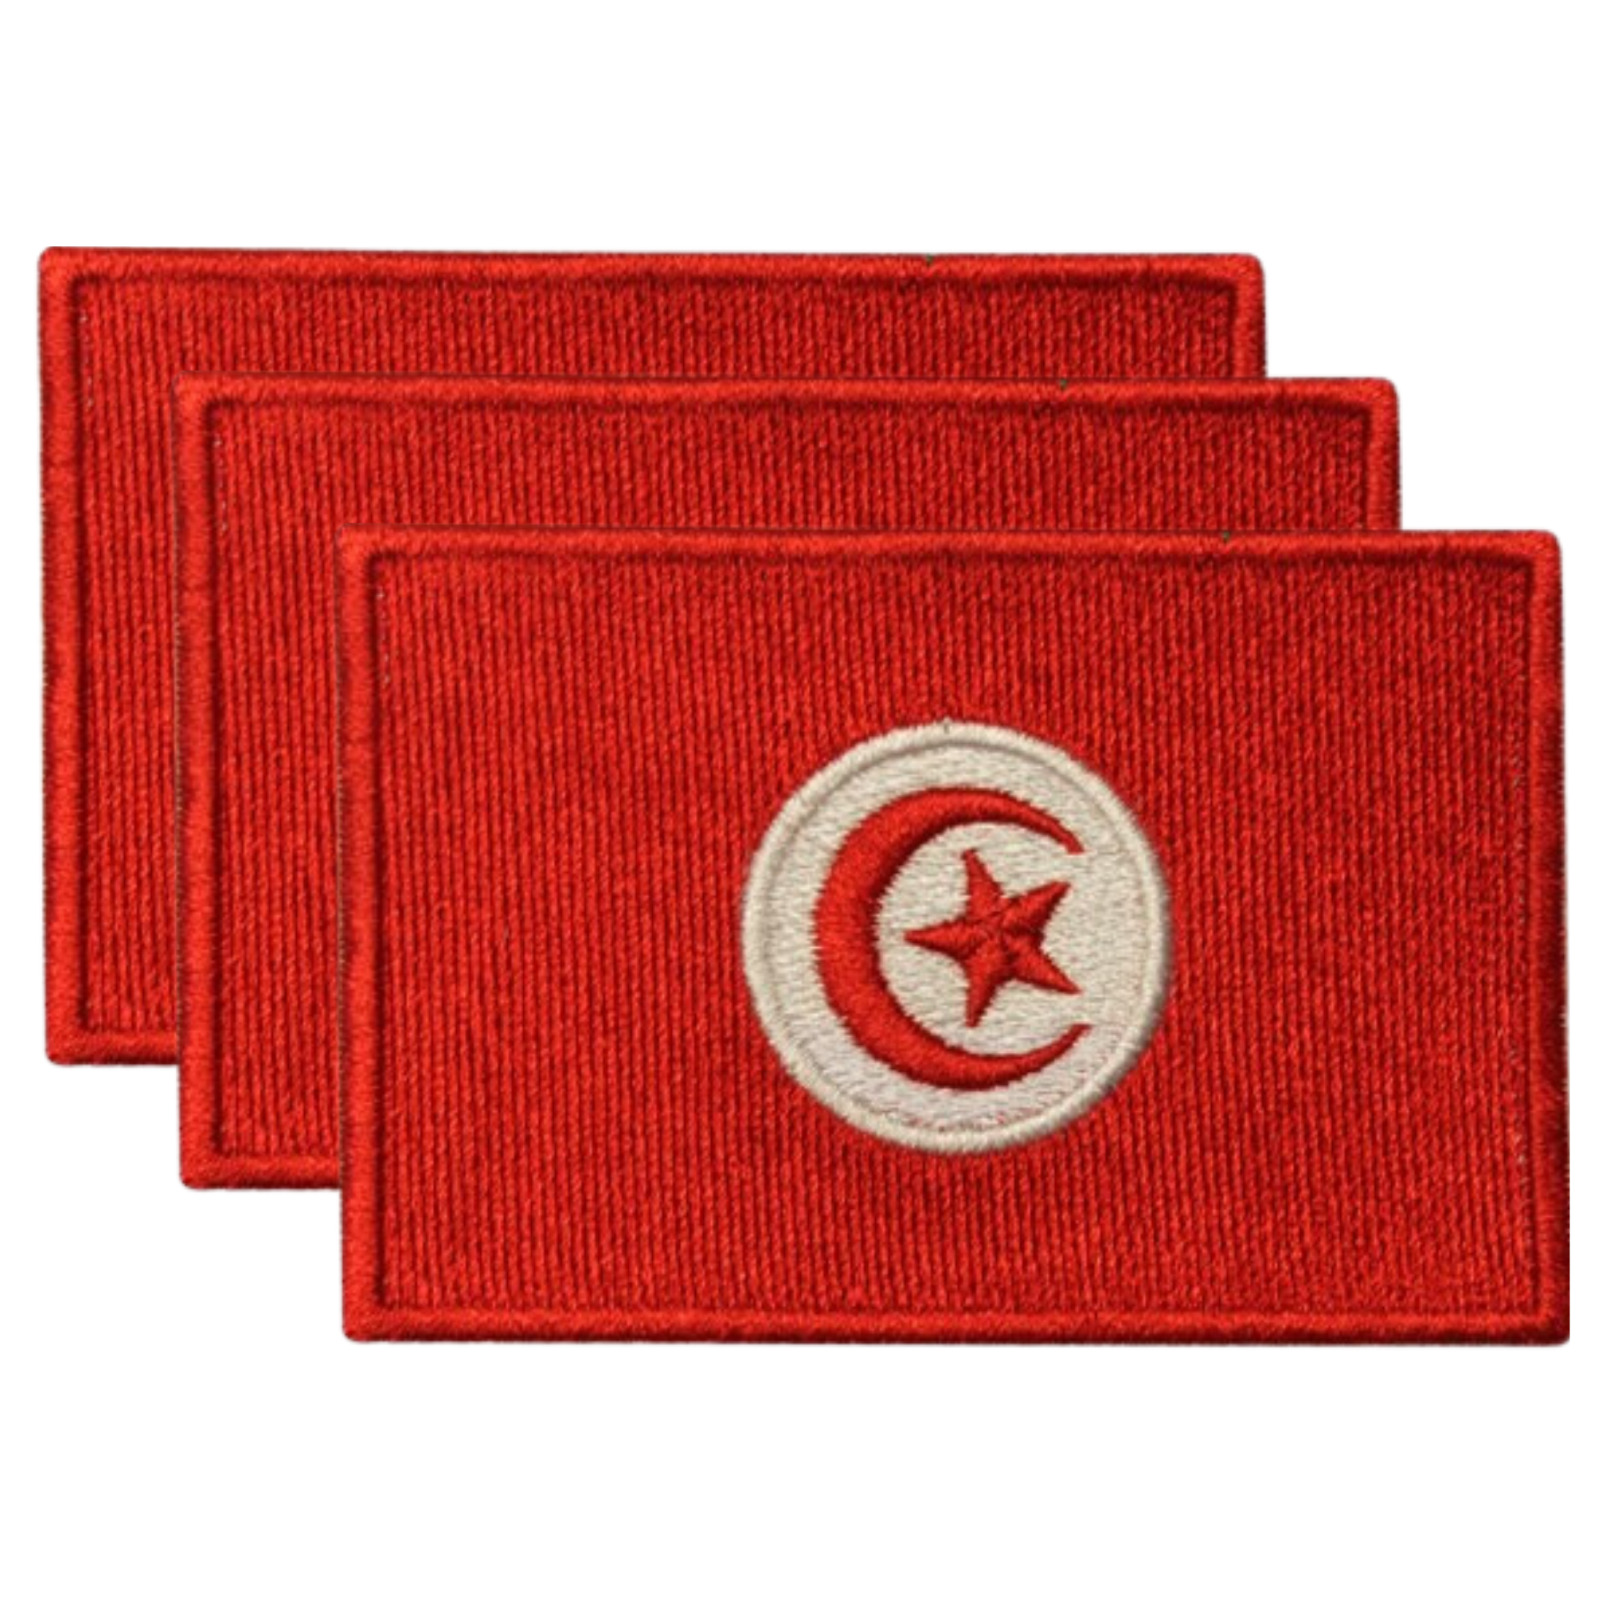 Tunisia International Country Flag Iron On Patch Embroidered Sew on Badge x3